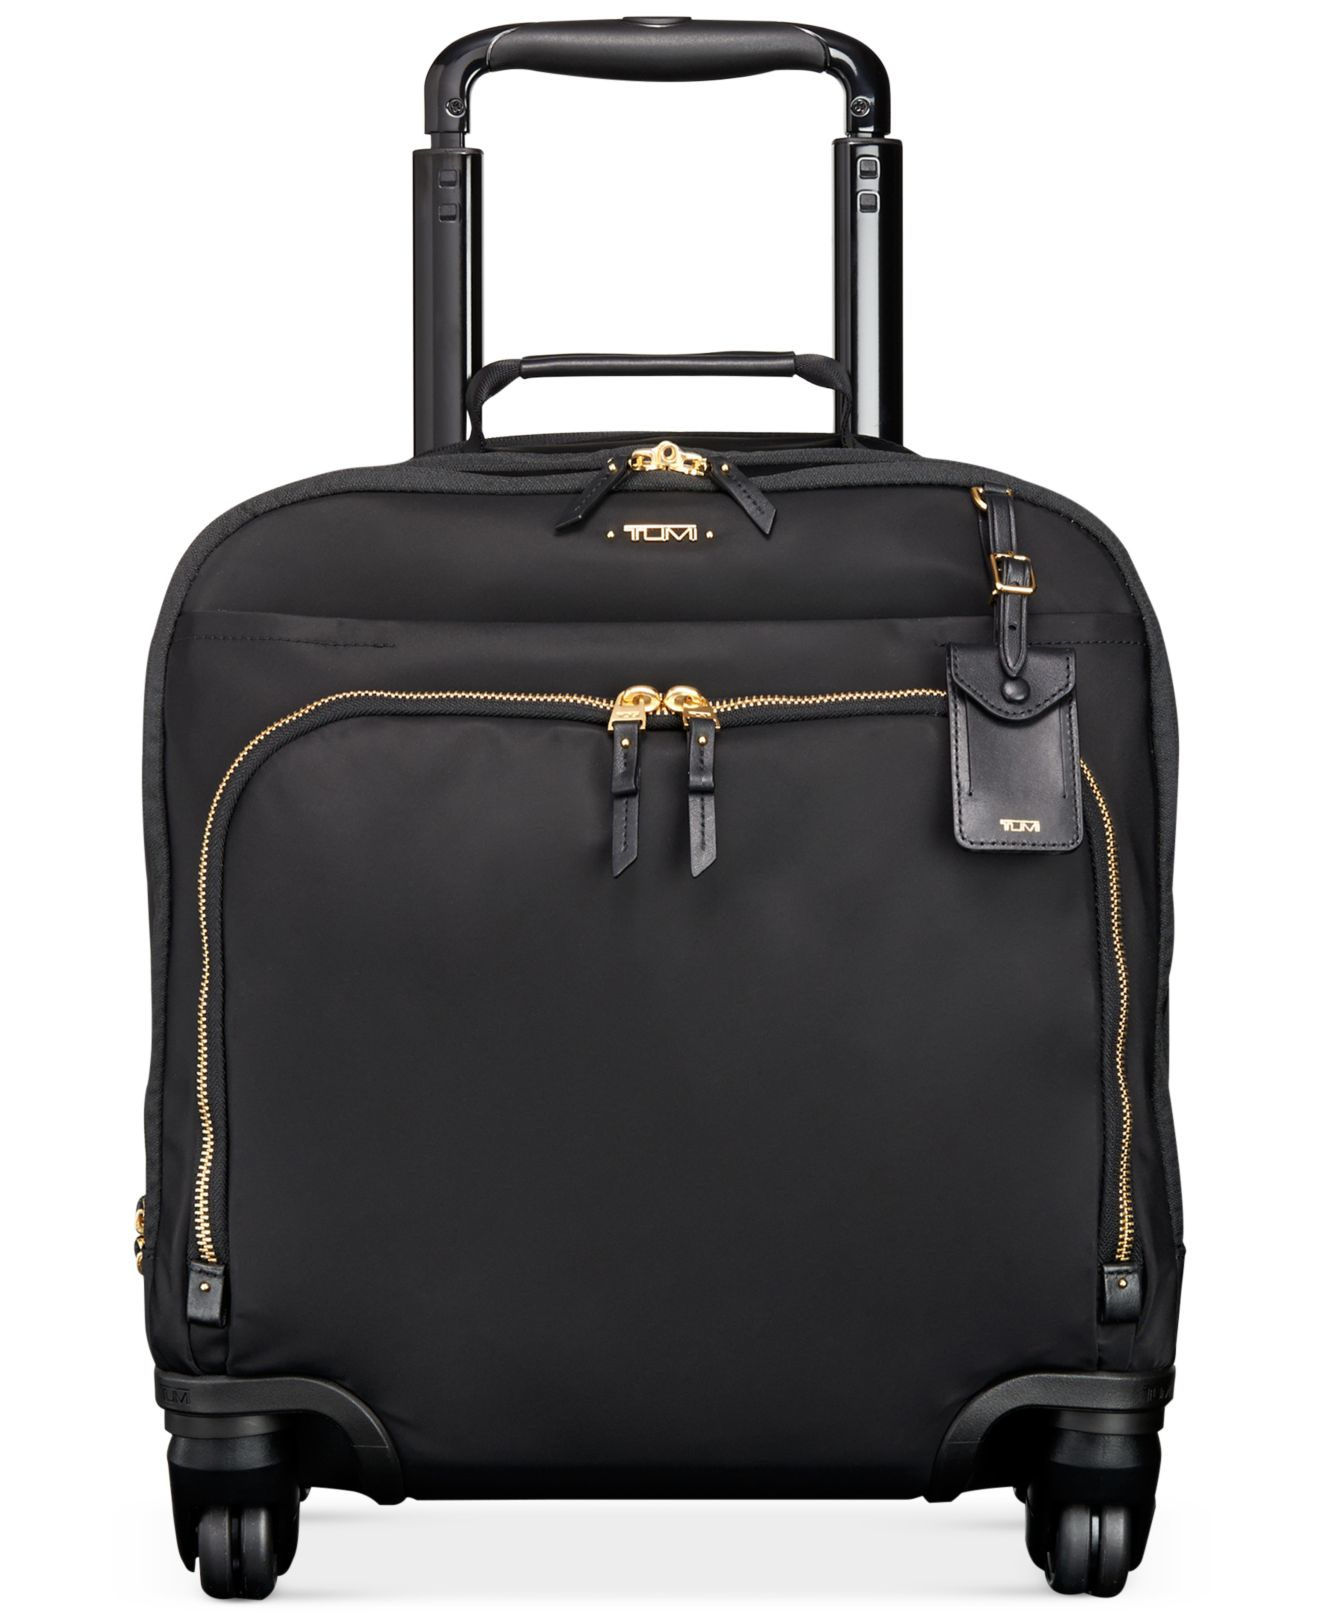 Tumi Voyageur Oslo Four Wheel Compact Carry on Suitcase in Black for 